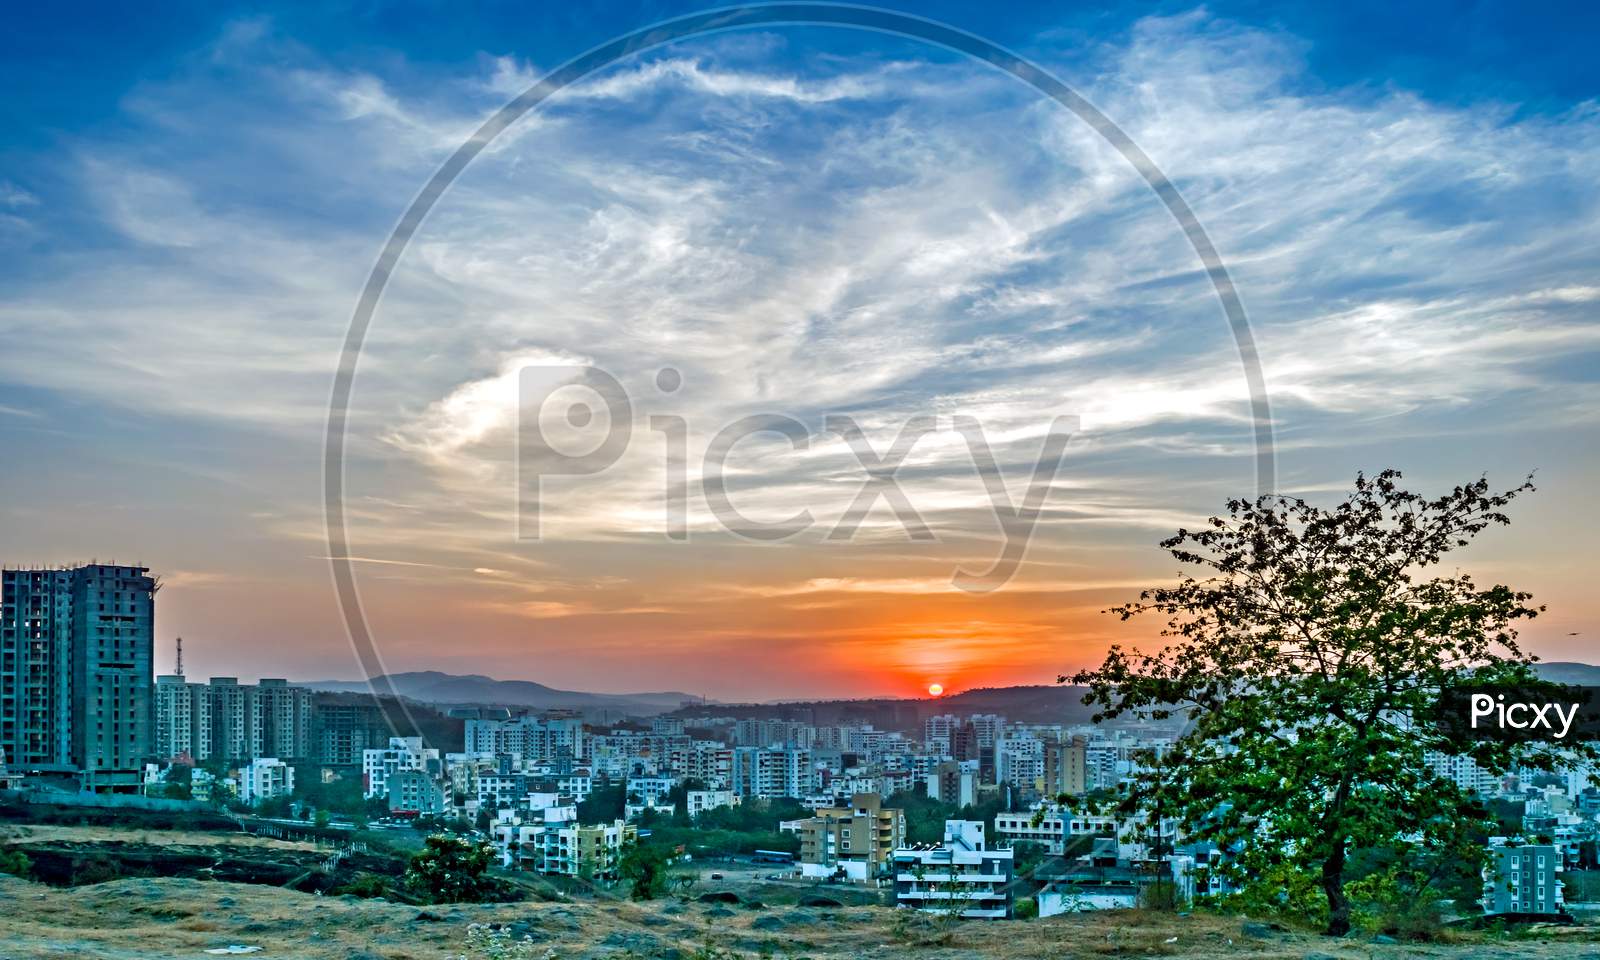 Sunset Behind Tall Buildings In A Rapidly Growing City-Pune, Maharashtra, India.